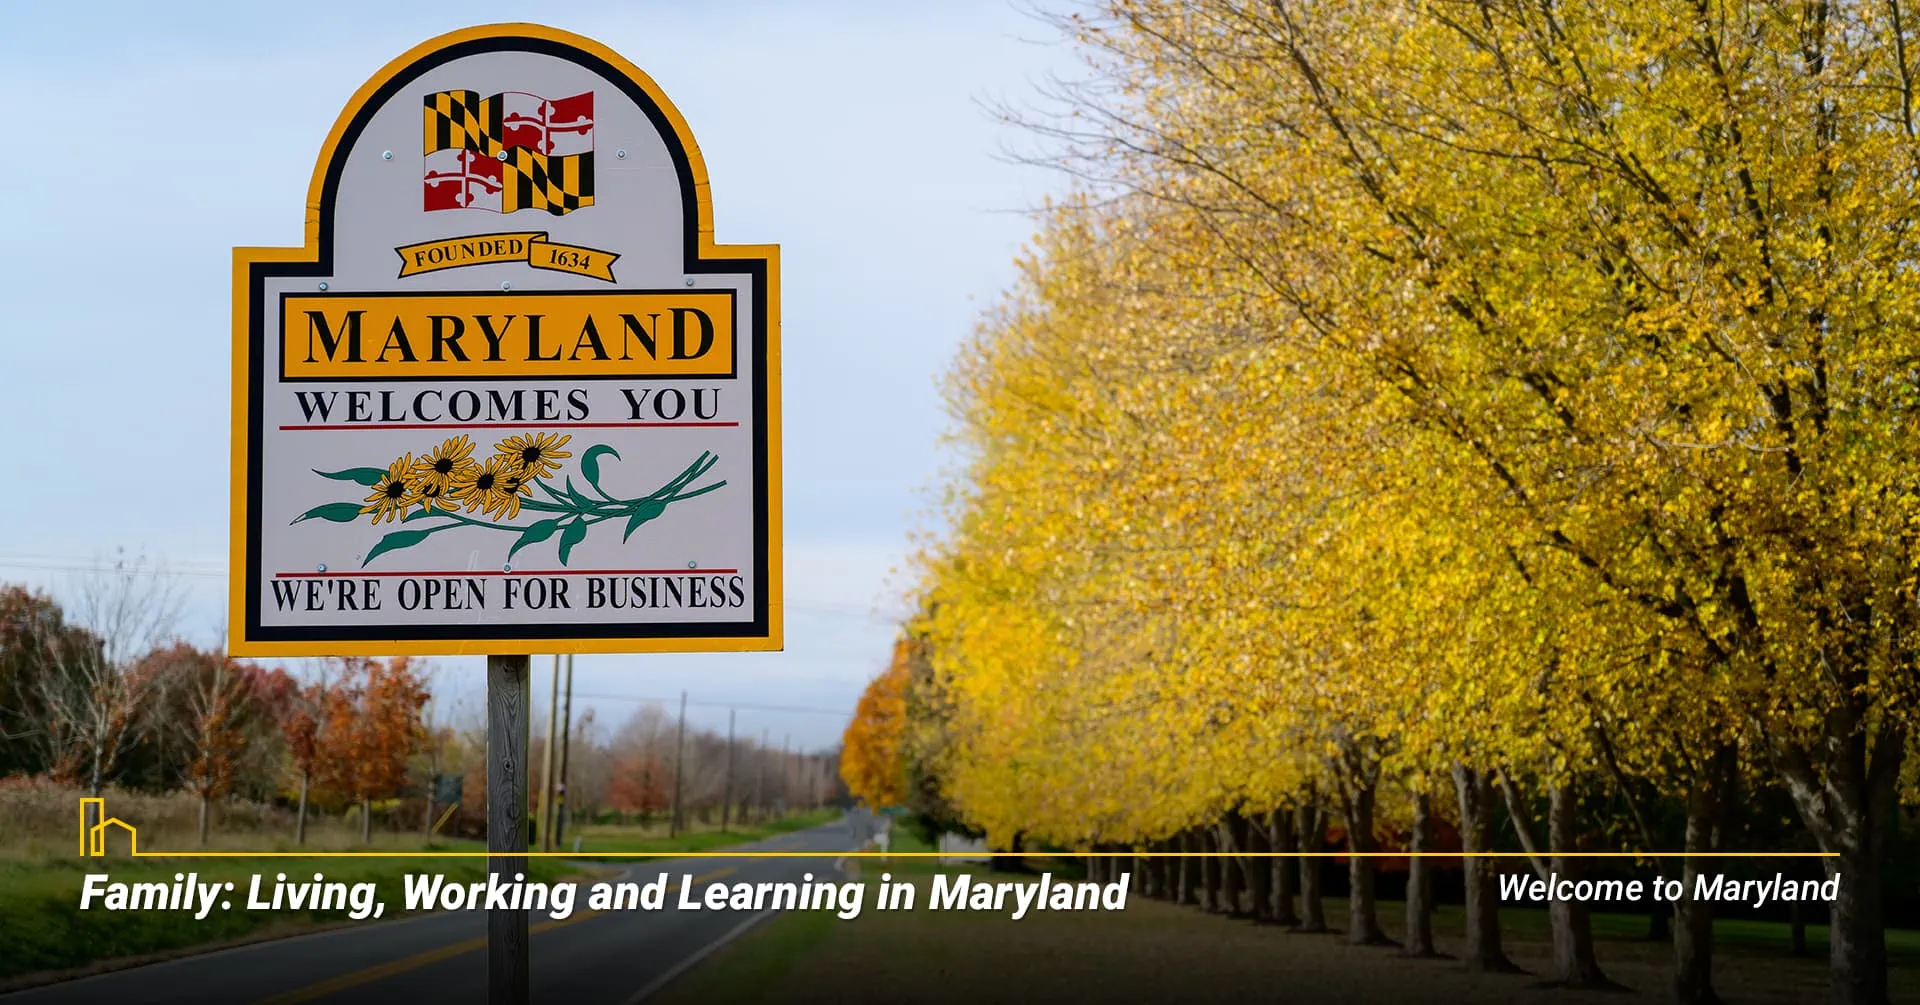 Family: Living, Working and Learning in Maryland